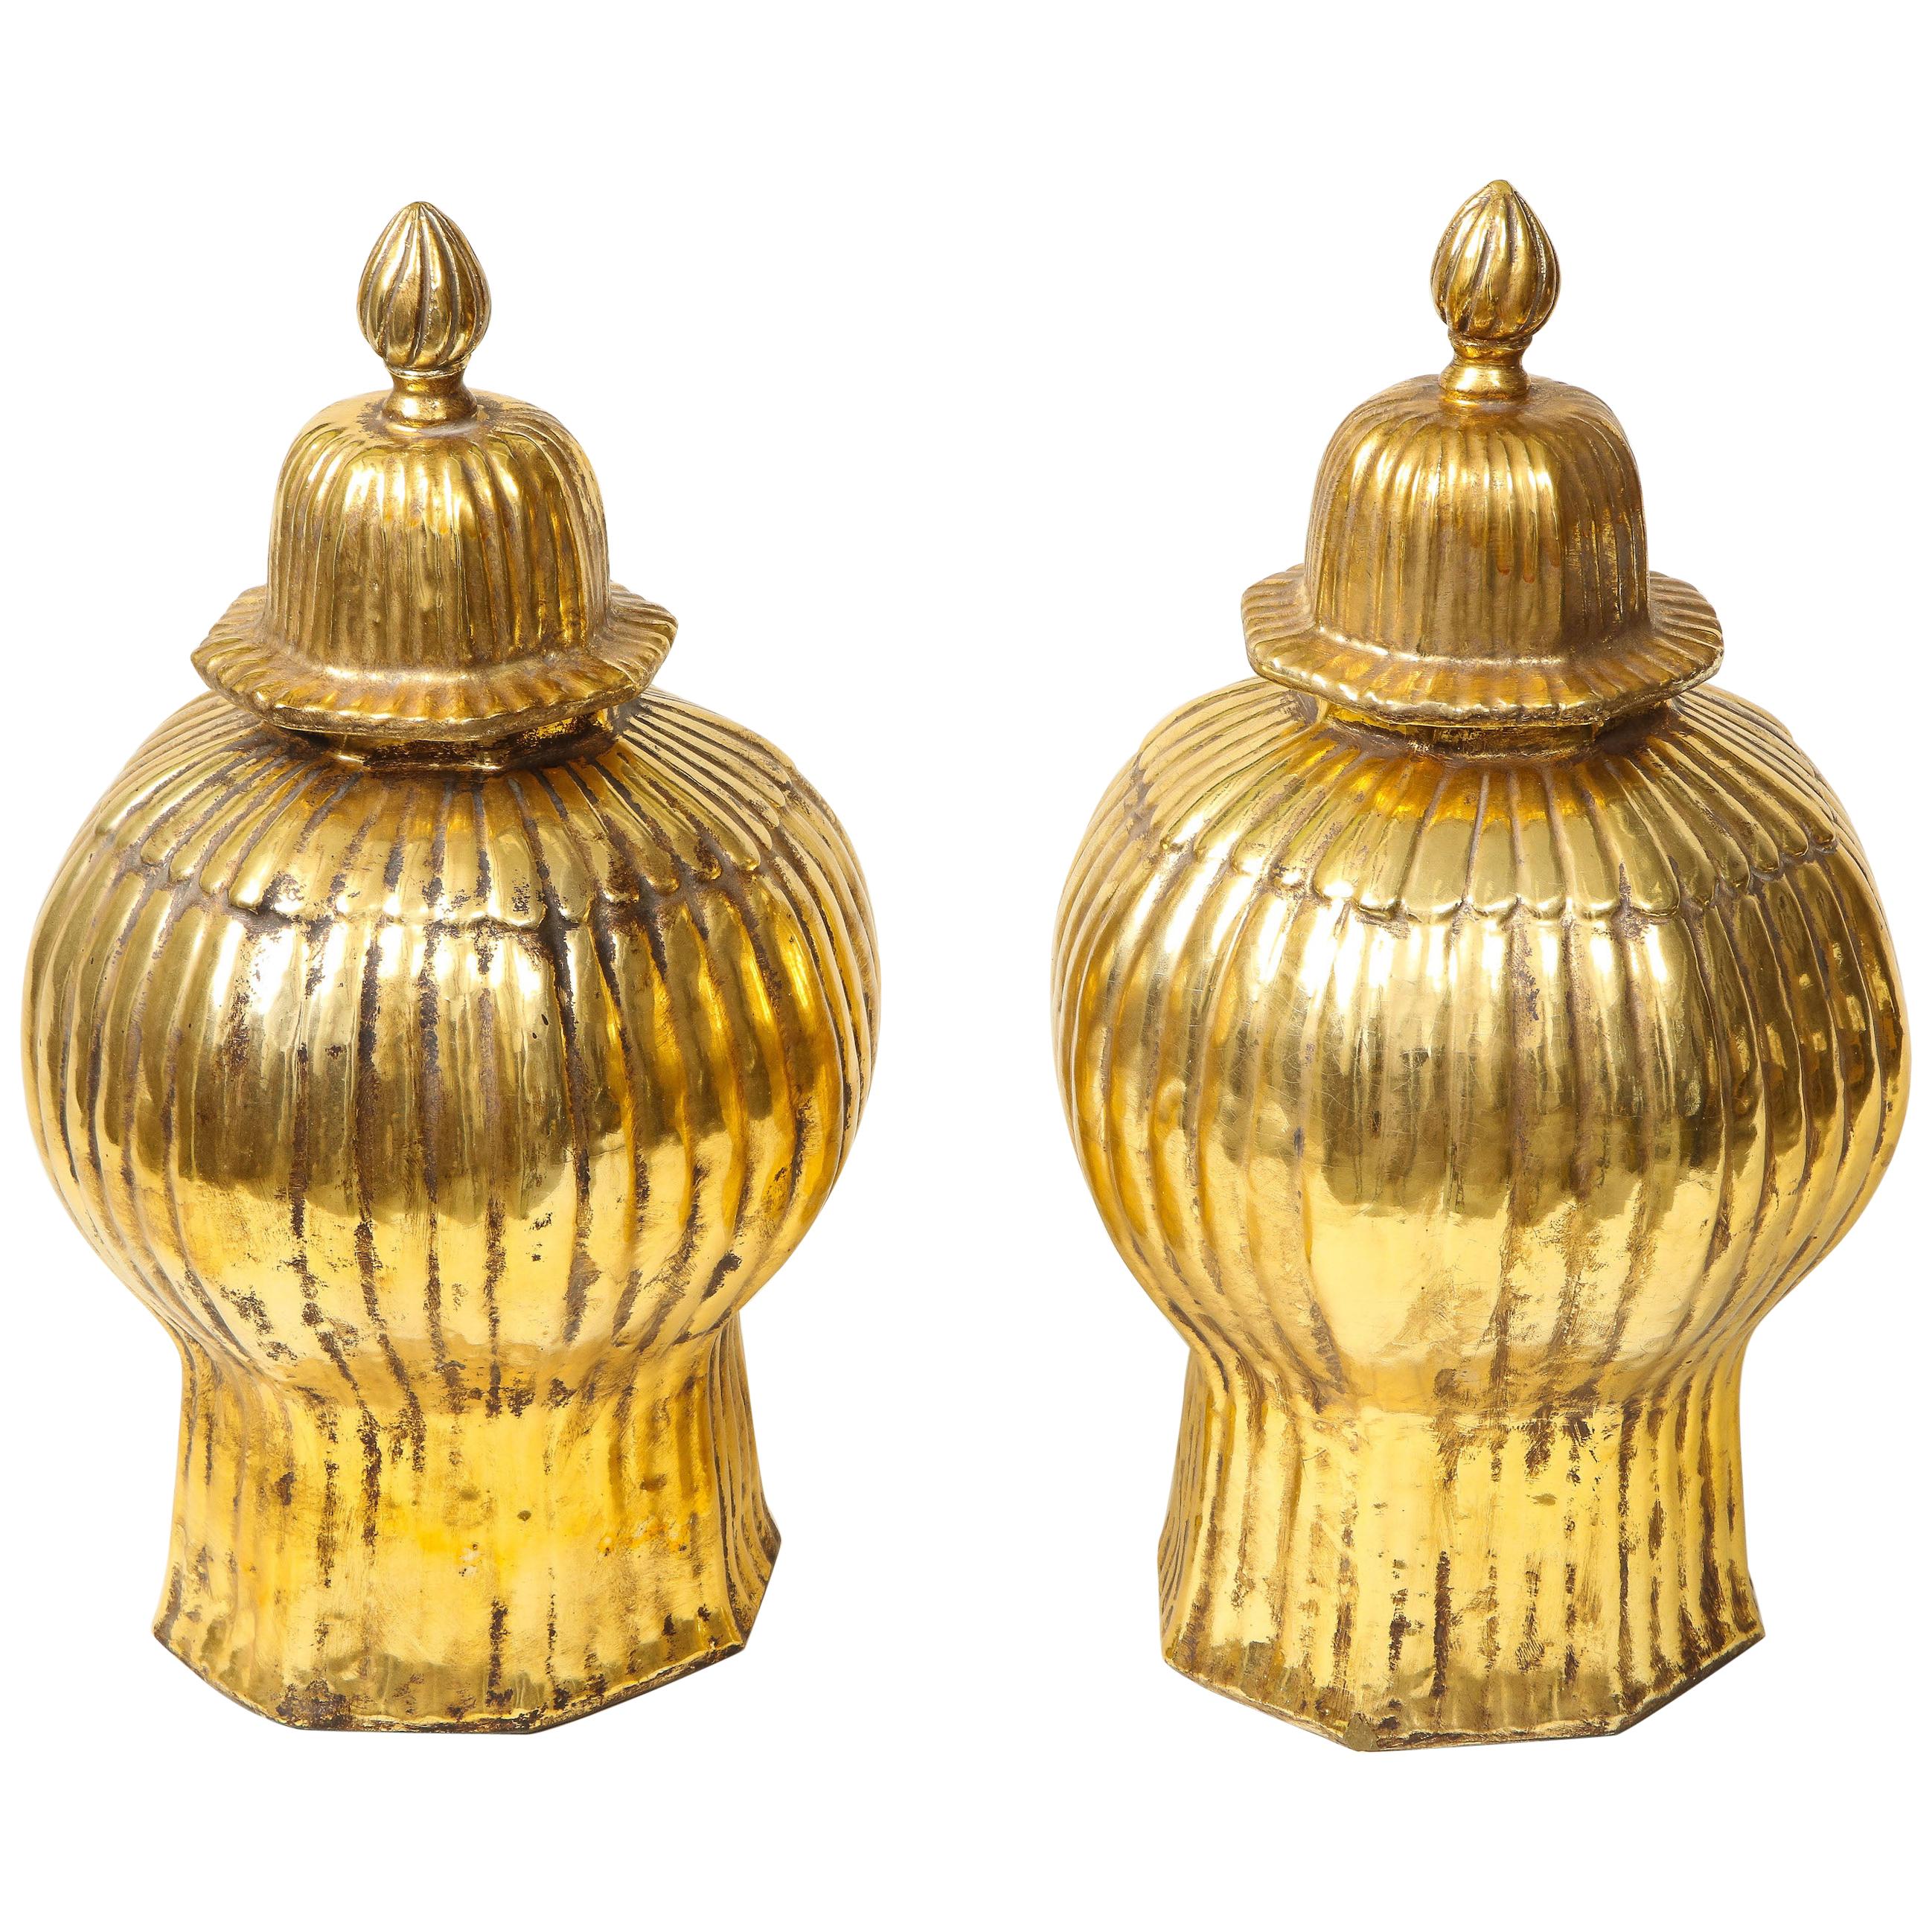 Pair of Gold Luster Ribbed Covered Ginger Jars